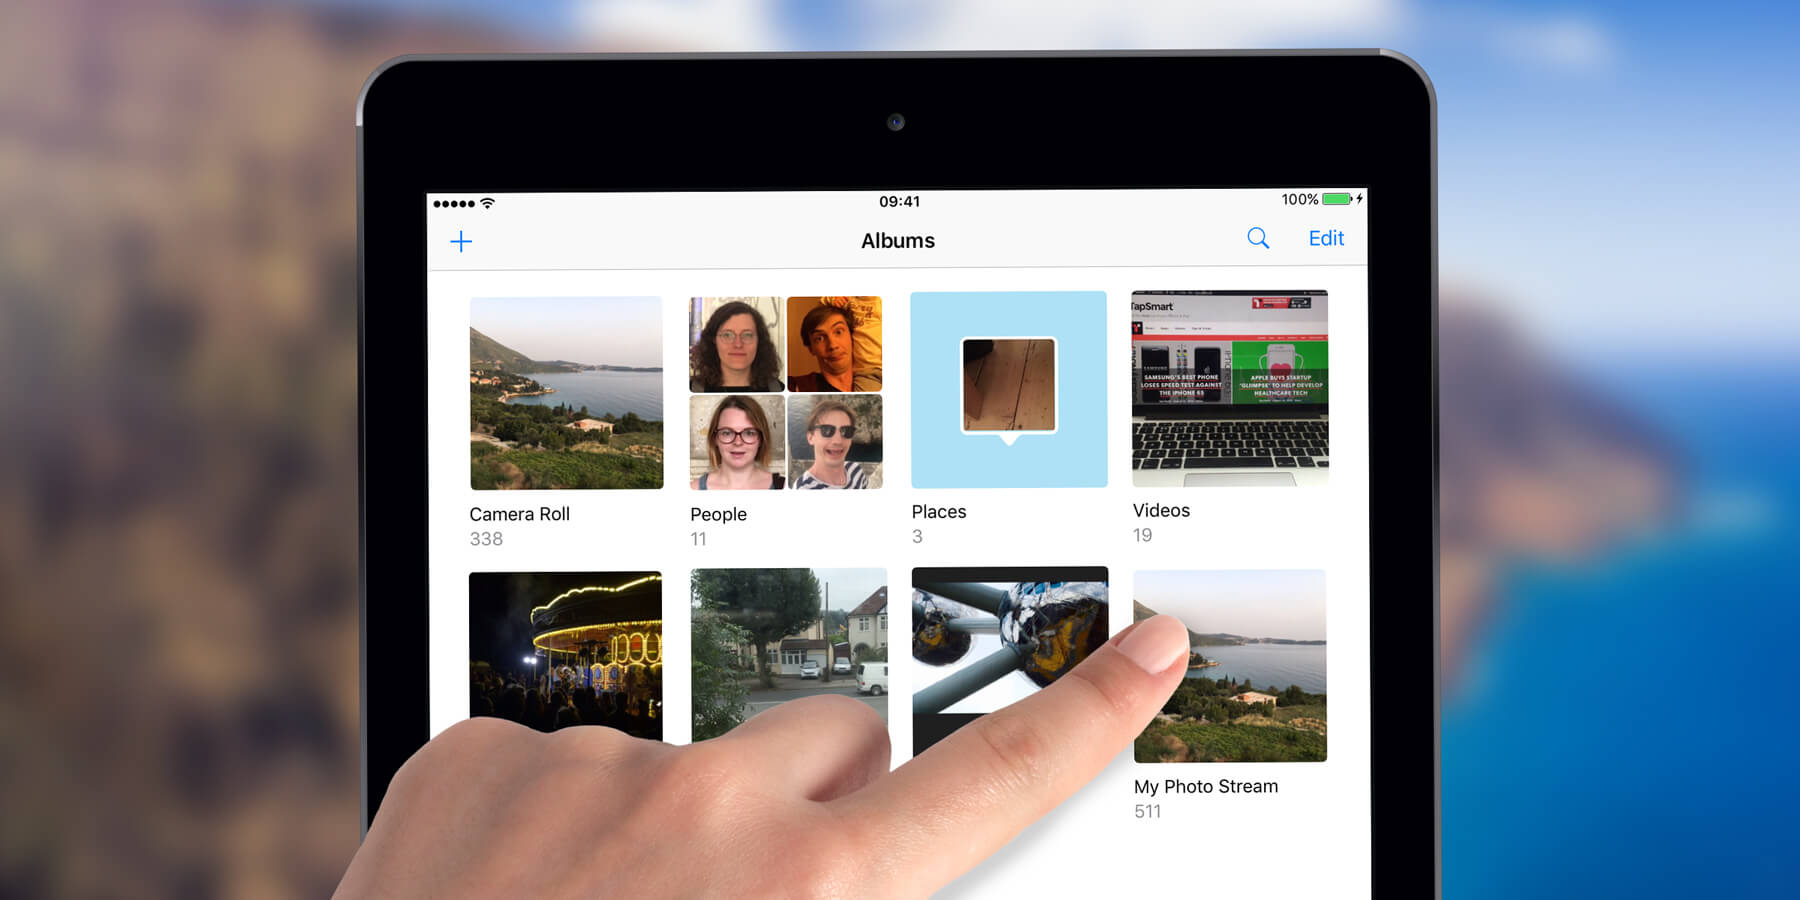 How To Recover Or Undelete A Photo On The IPad